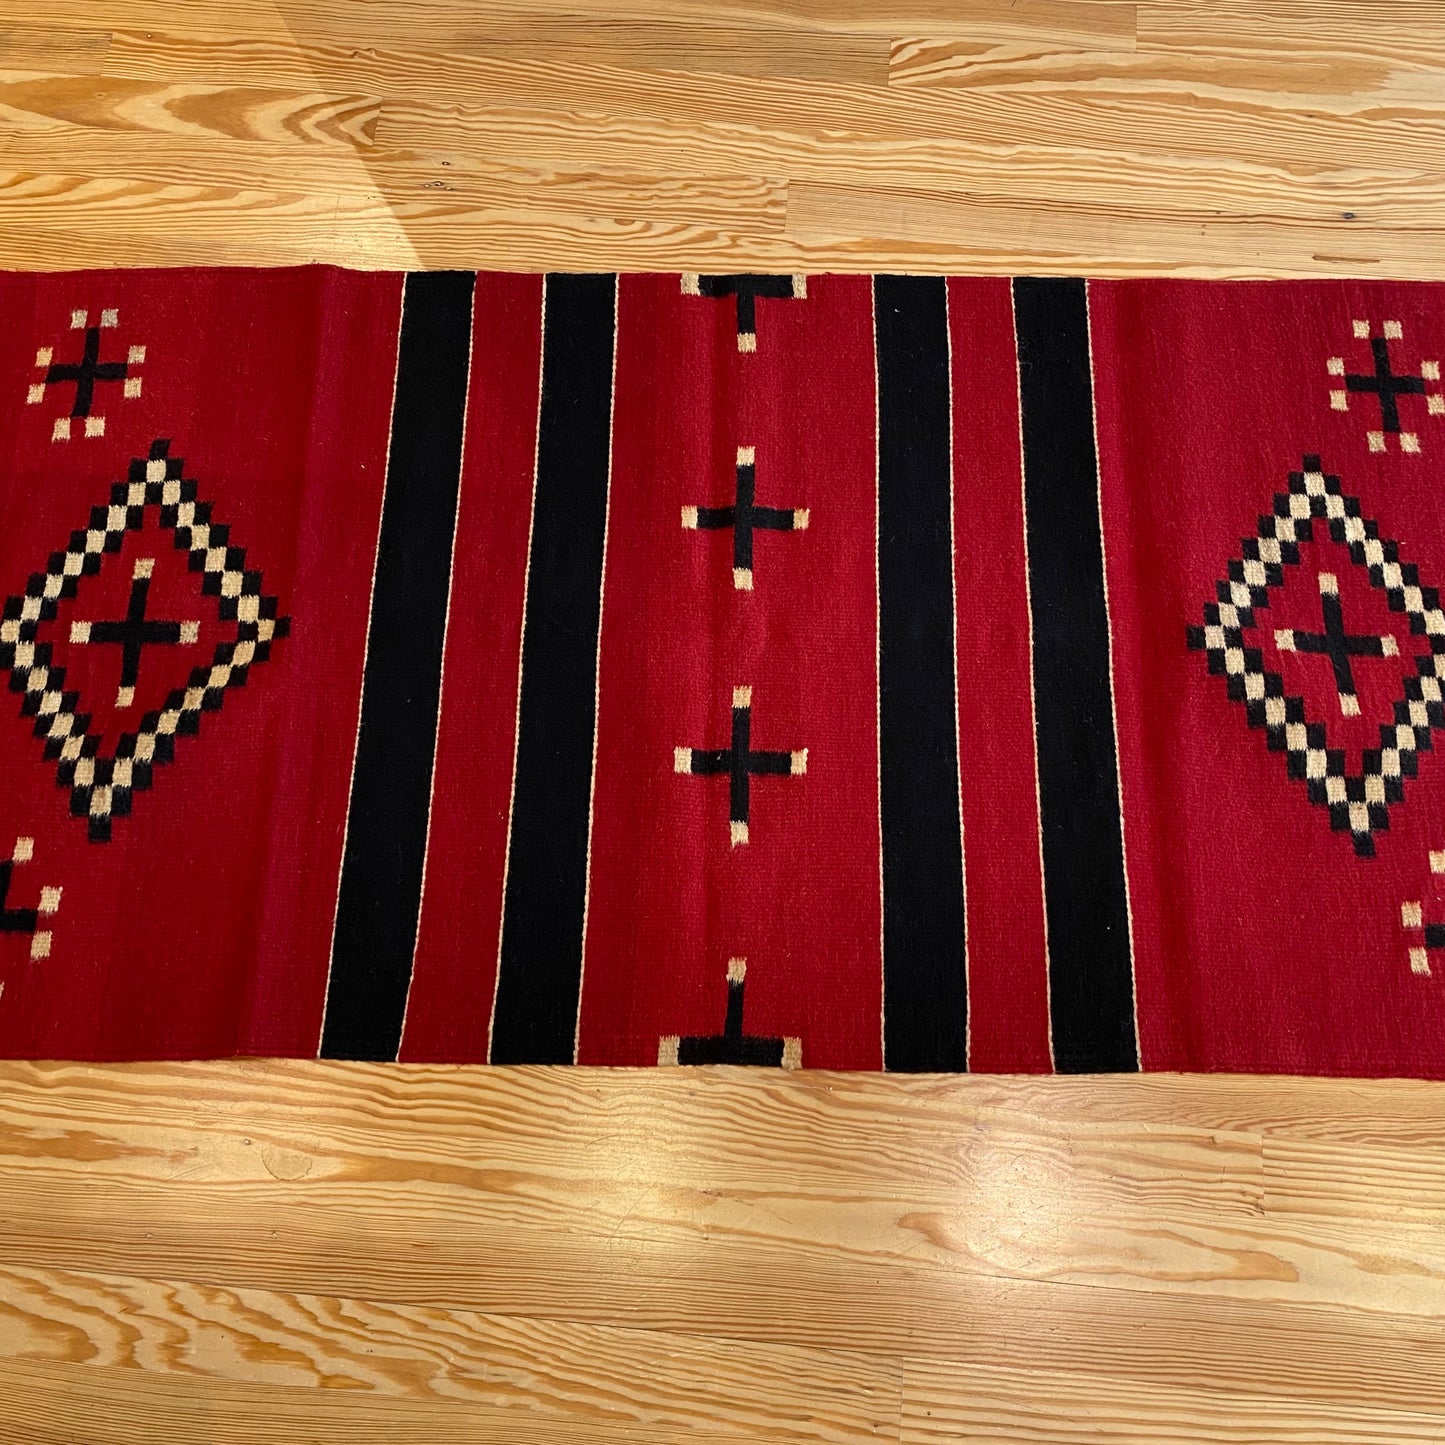 Small Rugs